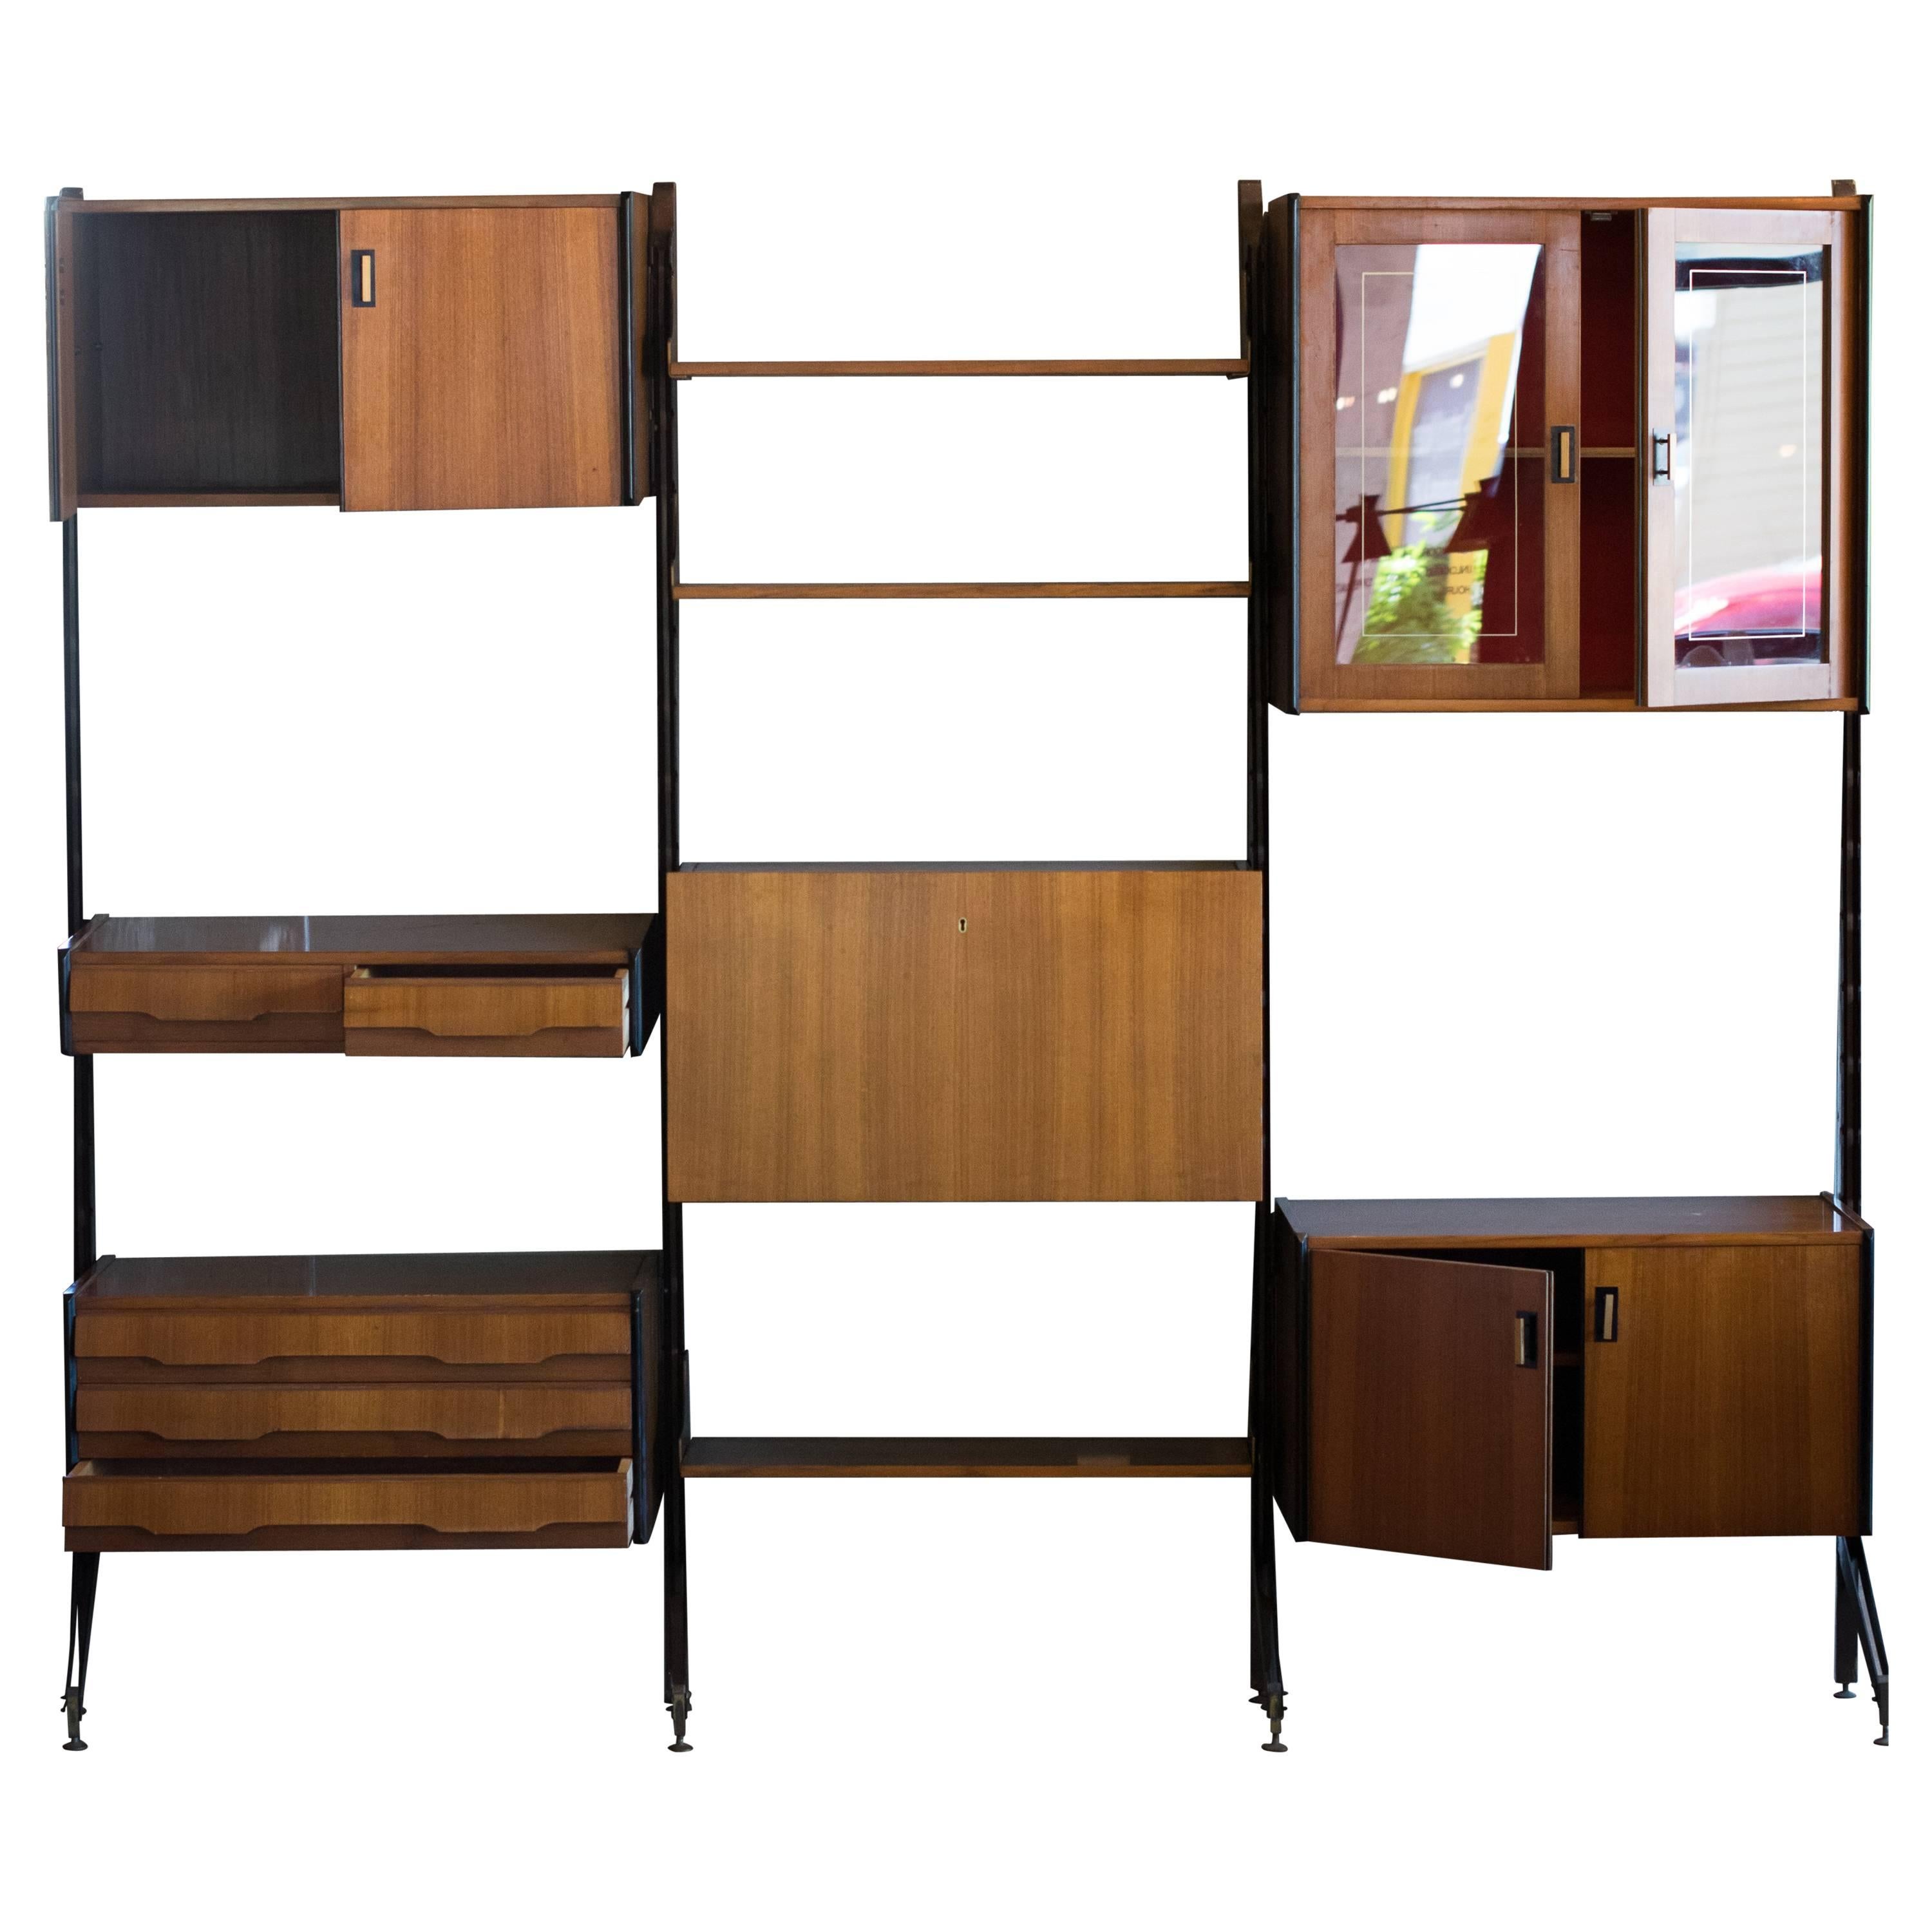 Bookcase and storage wall unit. Steel risers support teak shelves and cases with steel and brass hardware. Fully adjustable and freestanding. Cases and shelves can be reconfigured to create multiple arrangements, Italy, 1950s.

Includes three